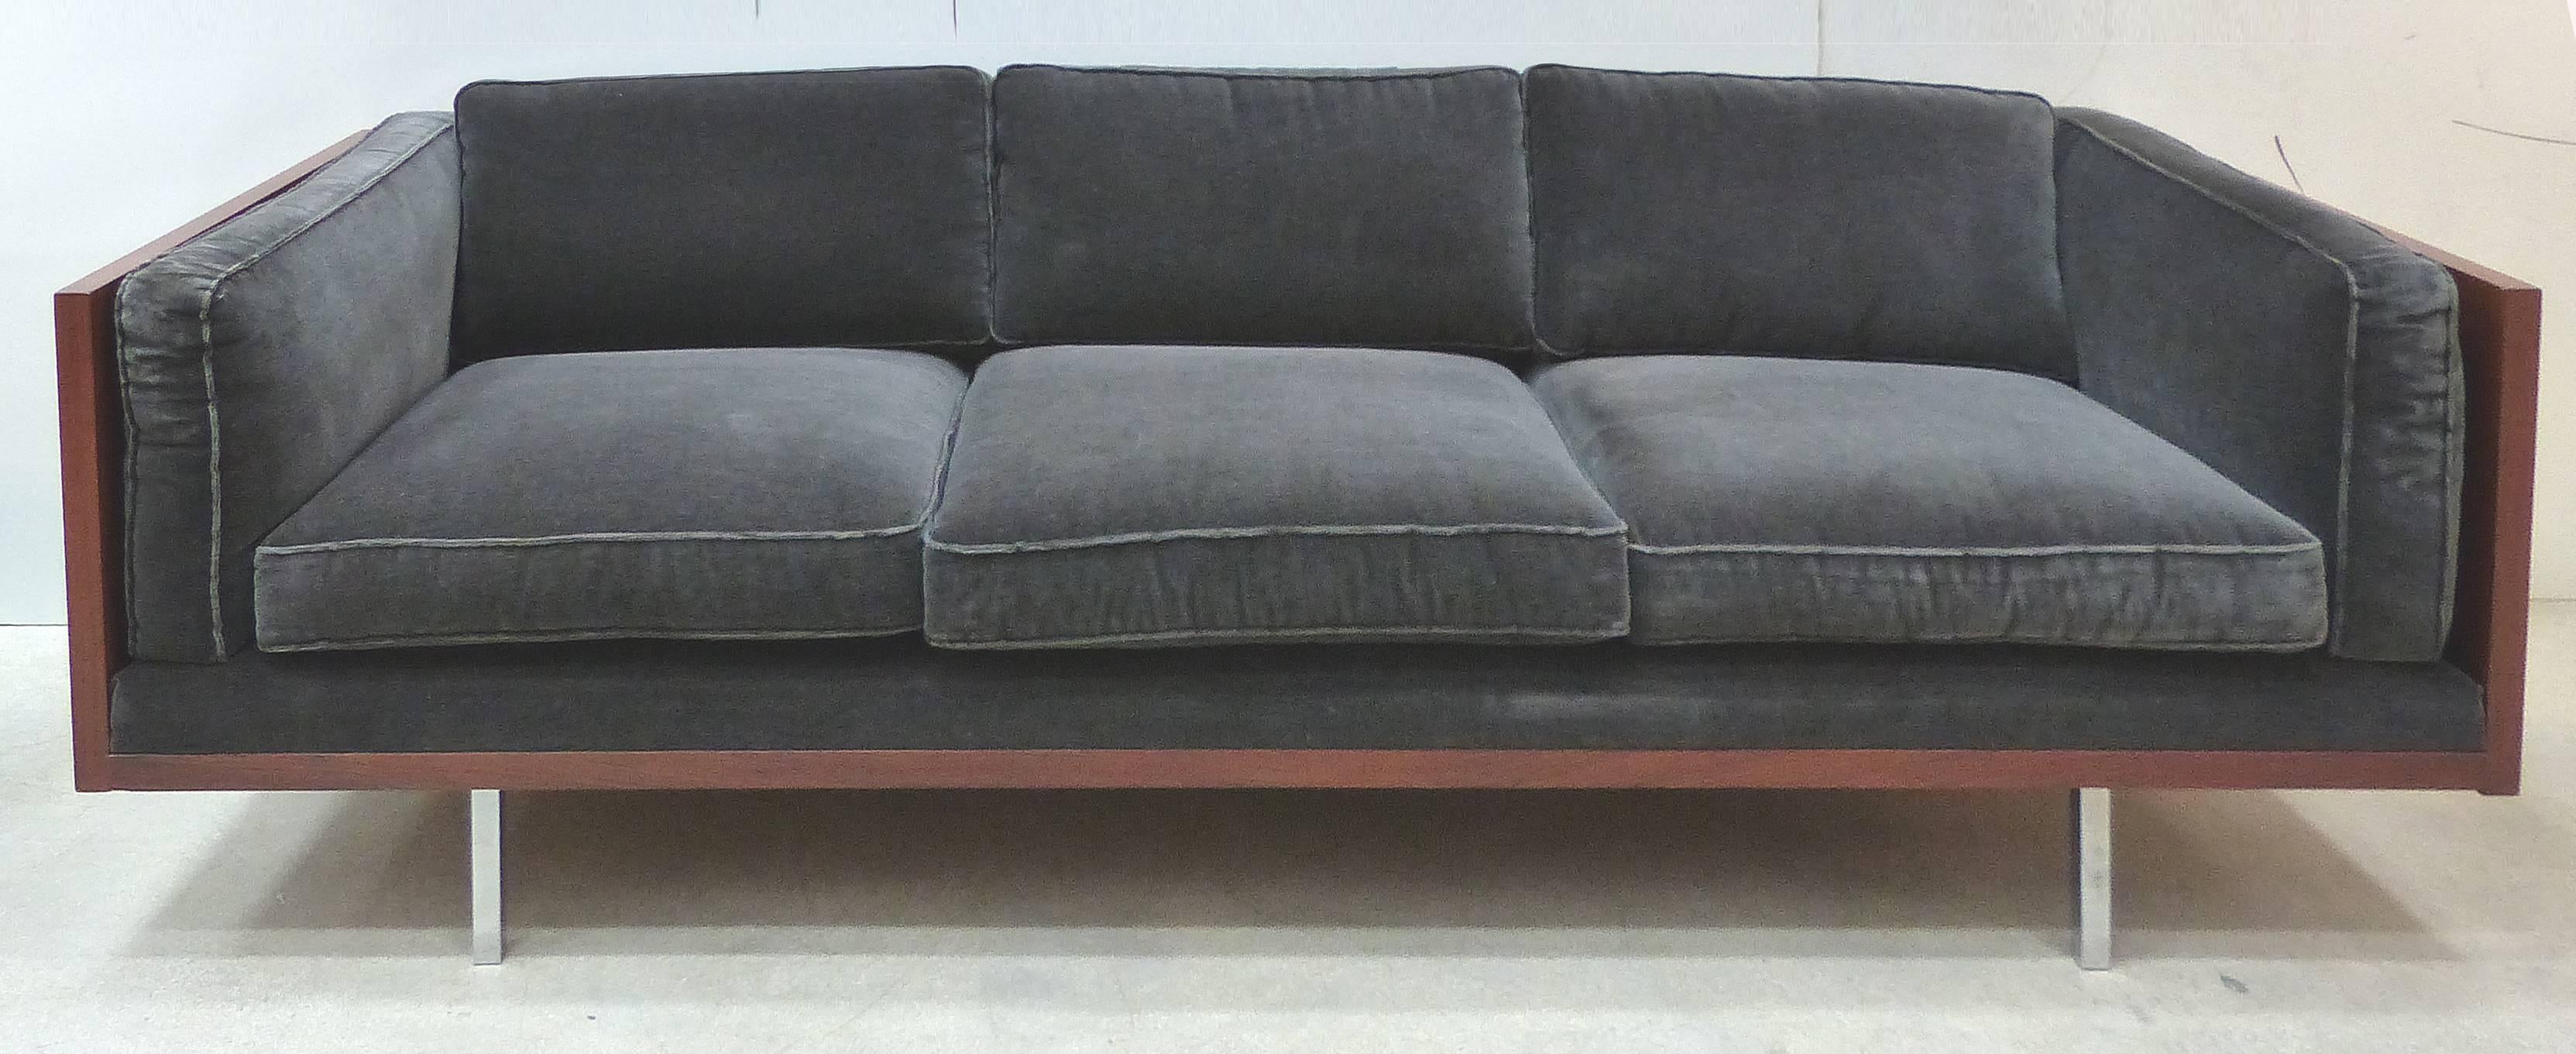 Milo Baughman Attributed Mid-Century Modern Wood Tuxedo Sofa 

Offered for sale is a Mid-Century Modern wood tuxedo sofa supported by chrome feet. It has been nicely reupholstered in a charcoal mohair velvet fabric. Often attributed to Milo Baughman